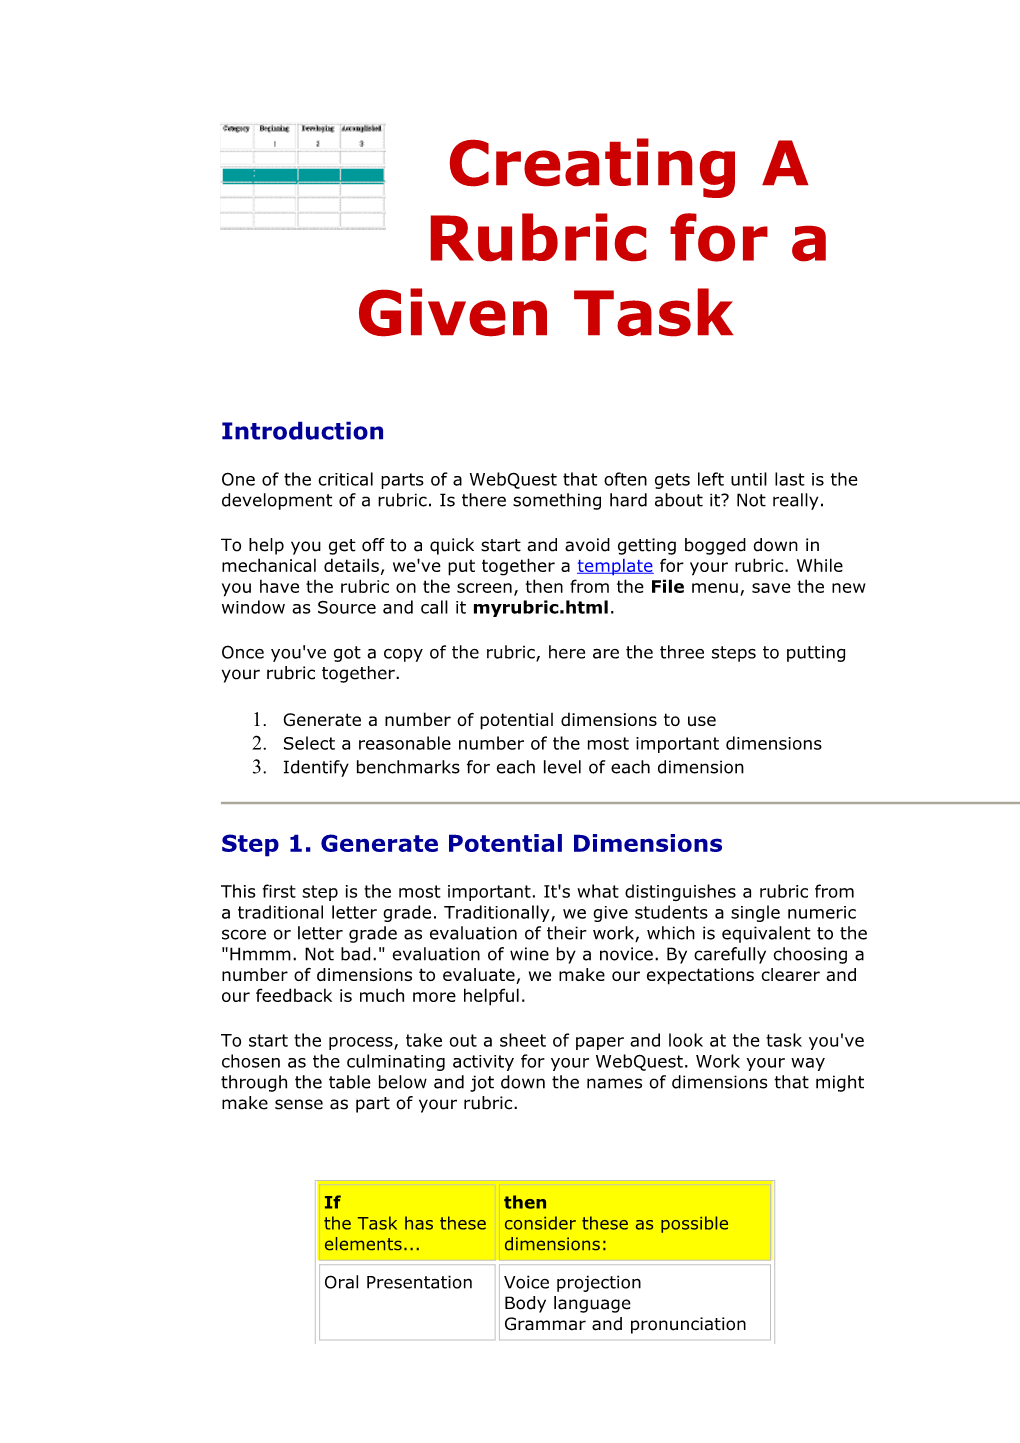 Creating a Rubric for a Given Task